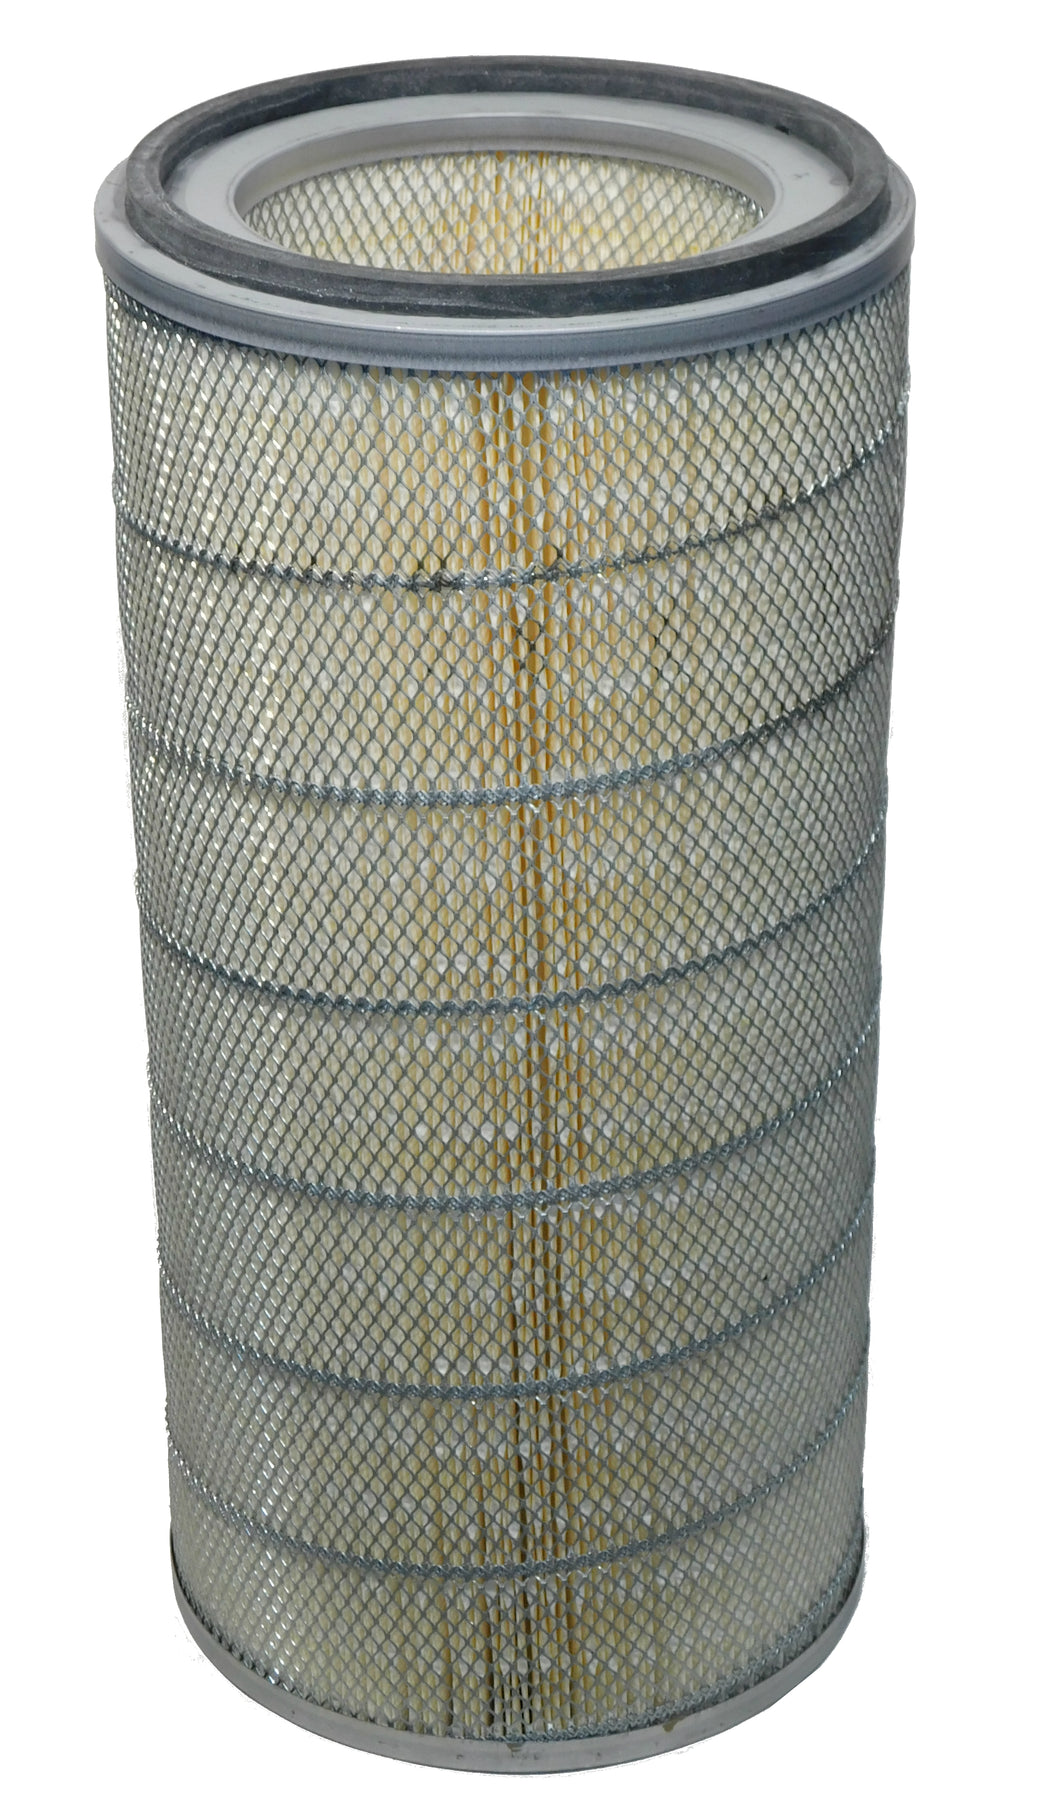 2704 - Invincible - OEM Replacement Filter